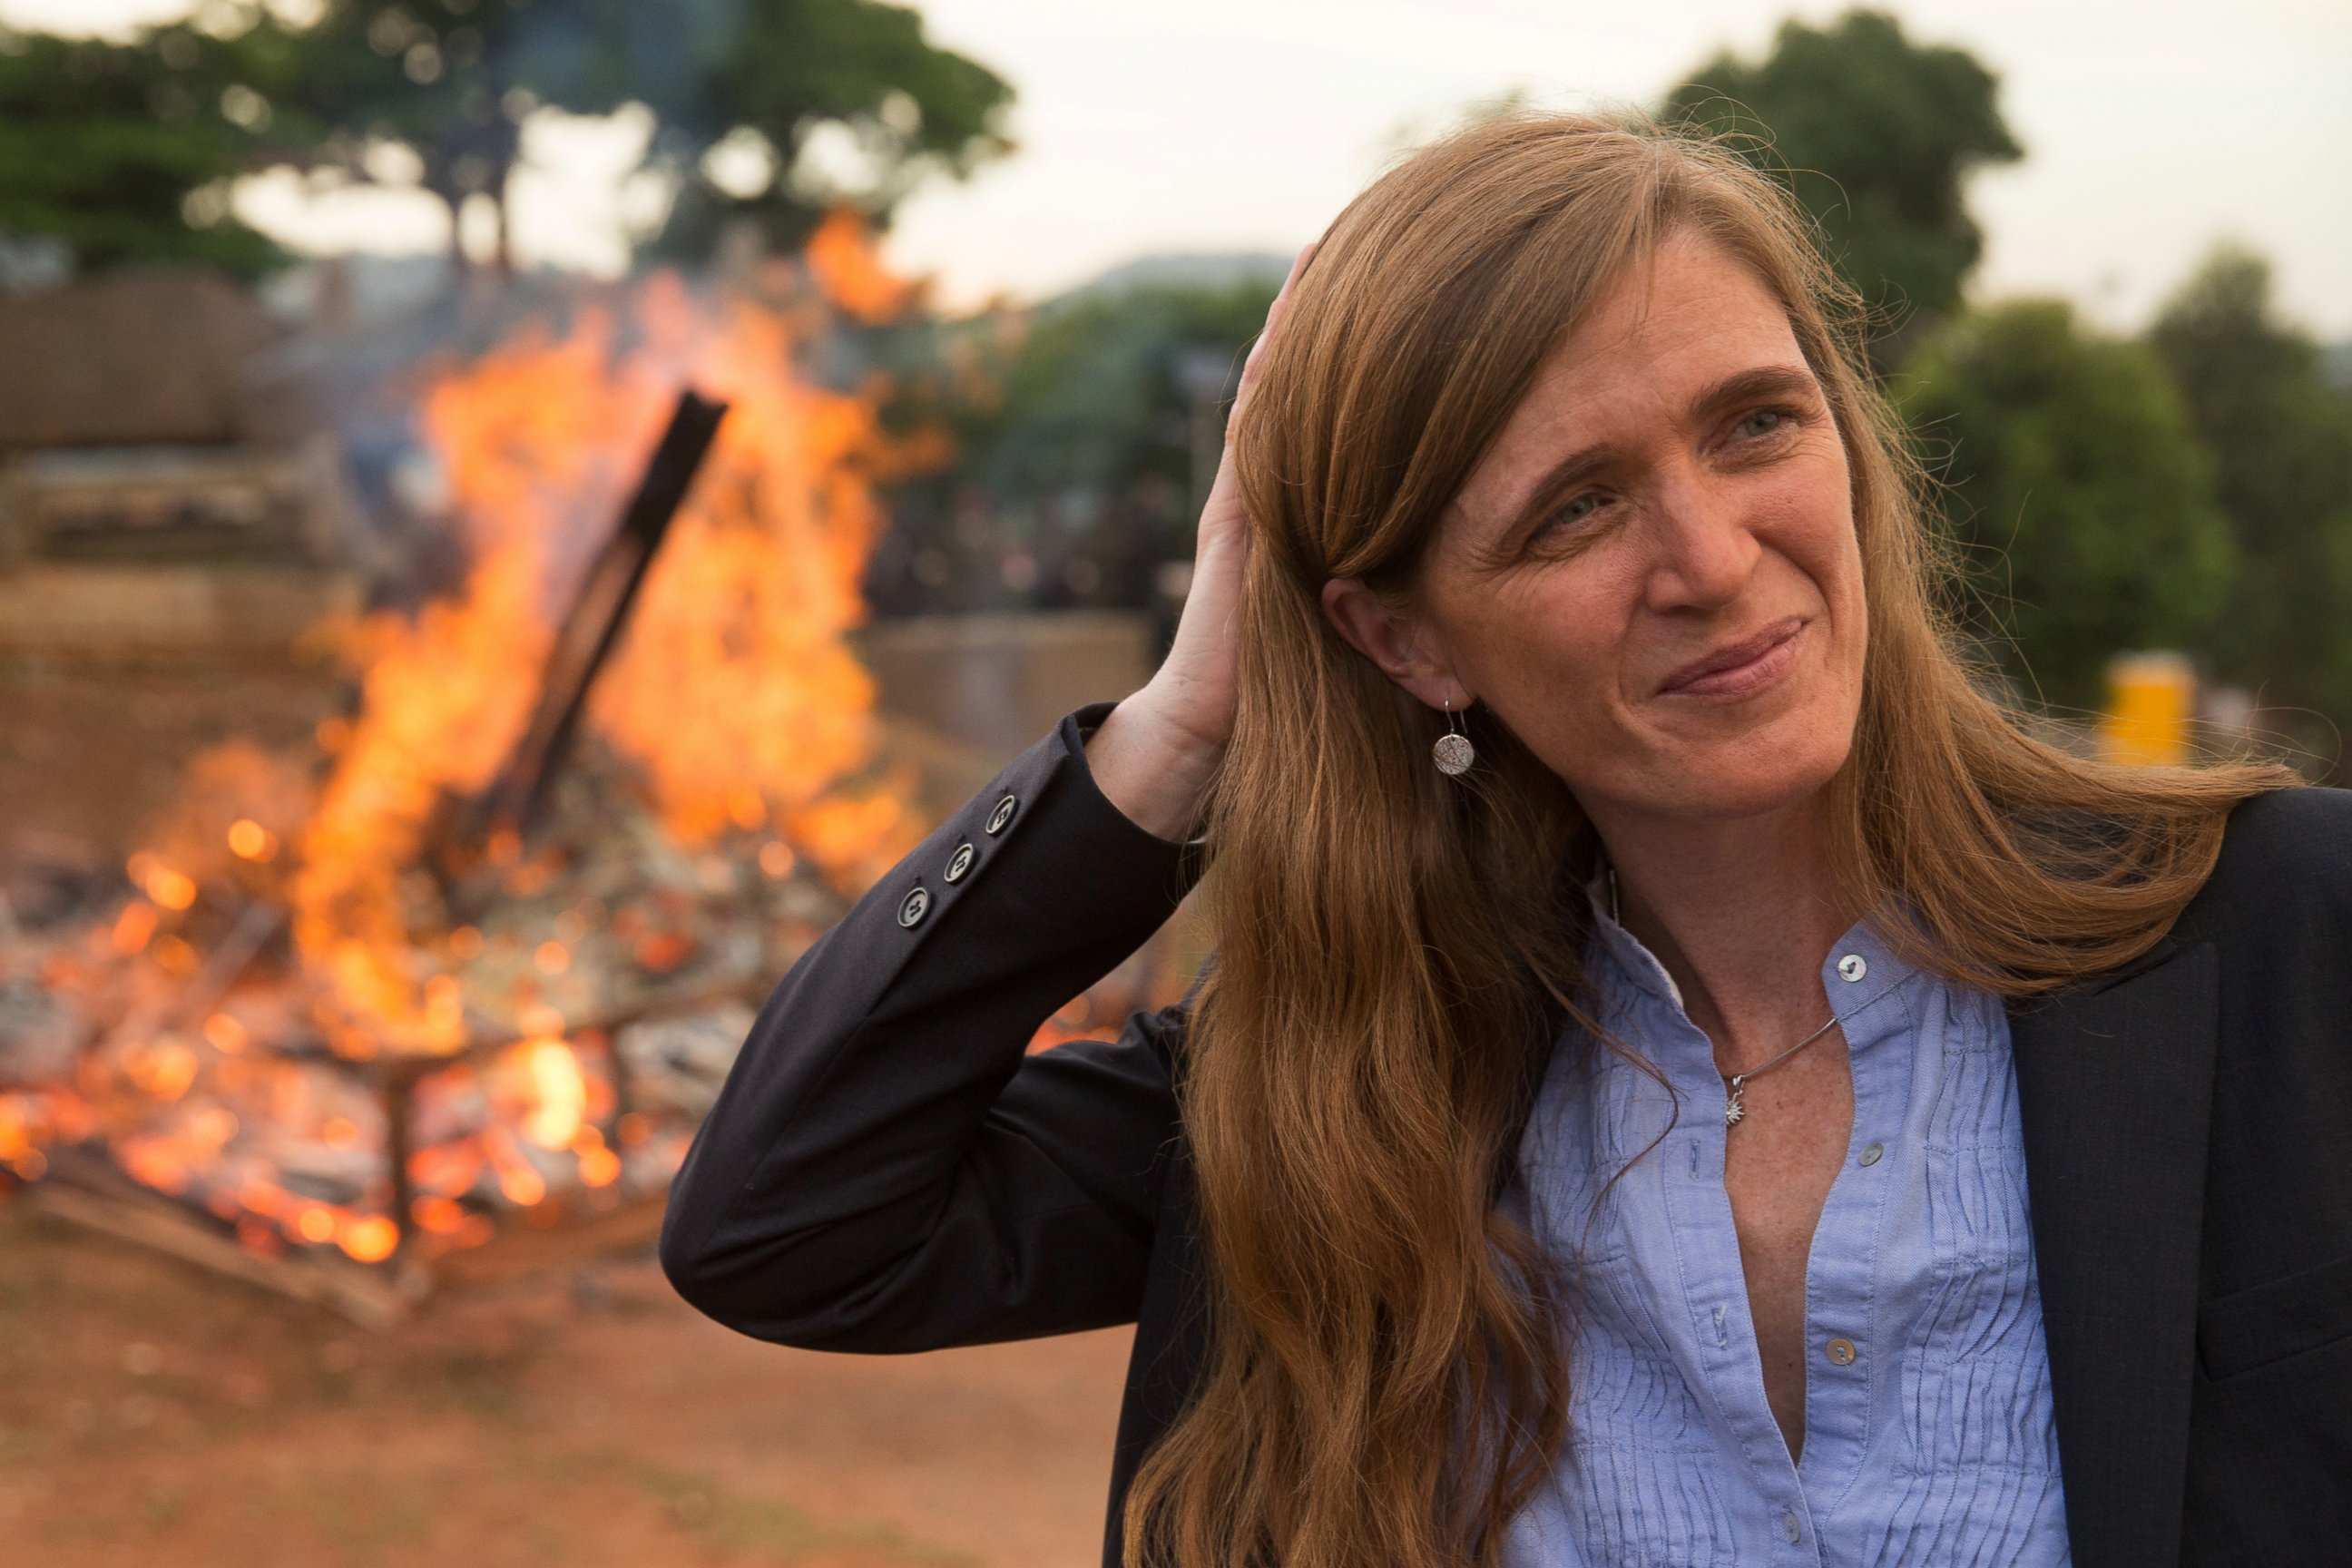 PHOTO: U.S. Ambassador to the United Nations Samantha Power stands near the first Cameroon Ivory Burn at the Palais des Congres in Yaounde, Cameroon, April 19, 2016.